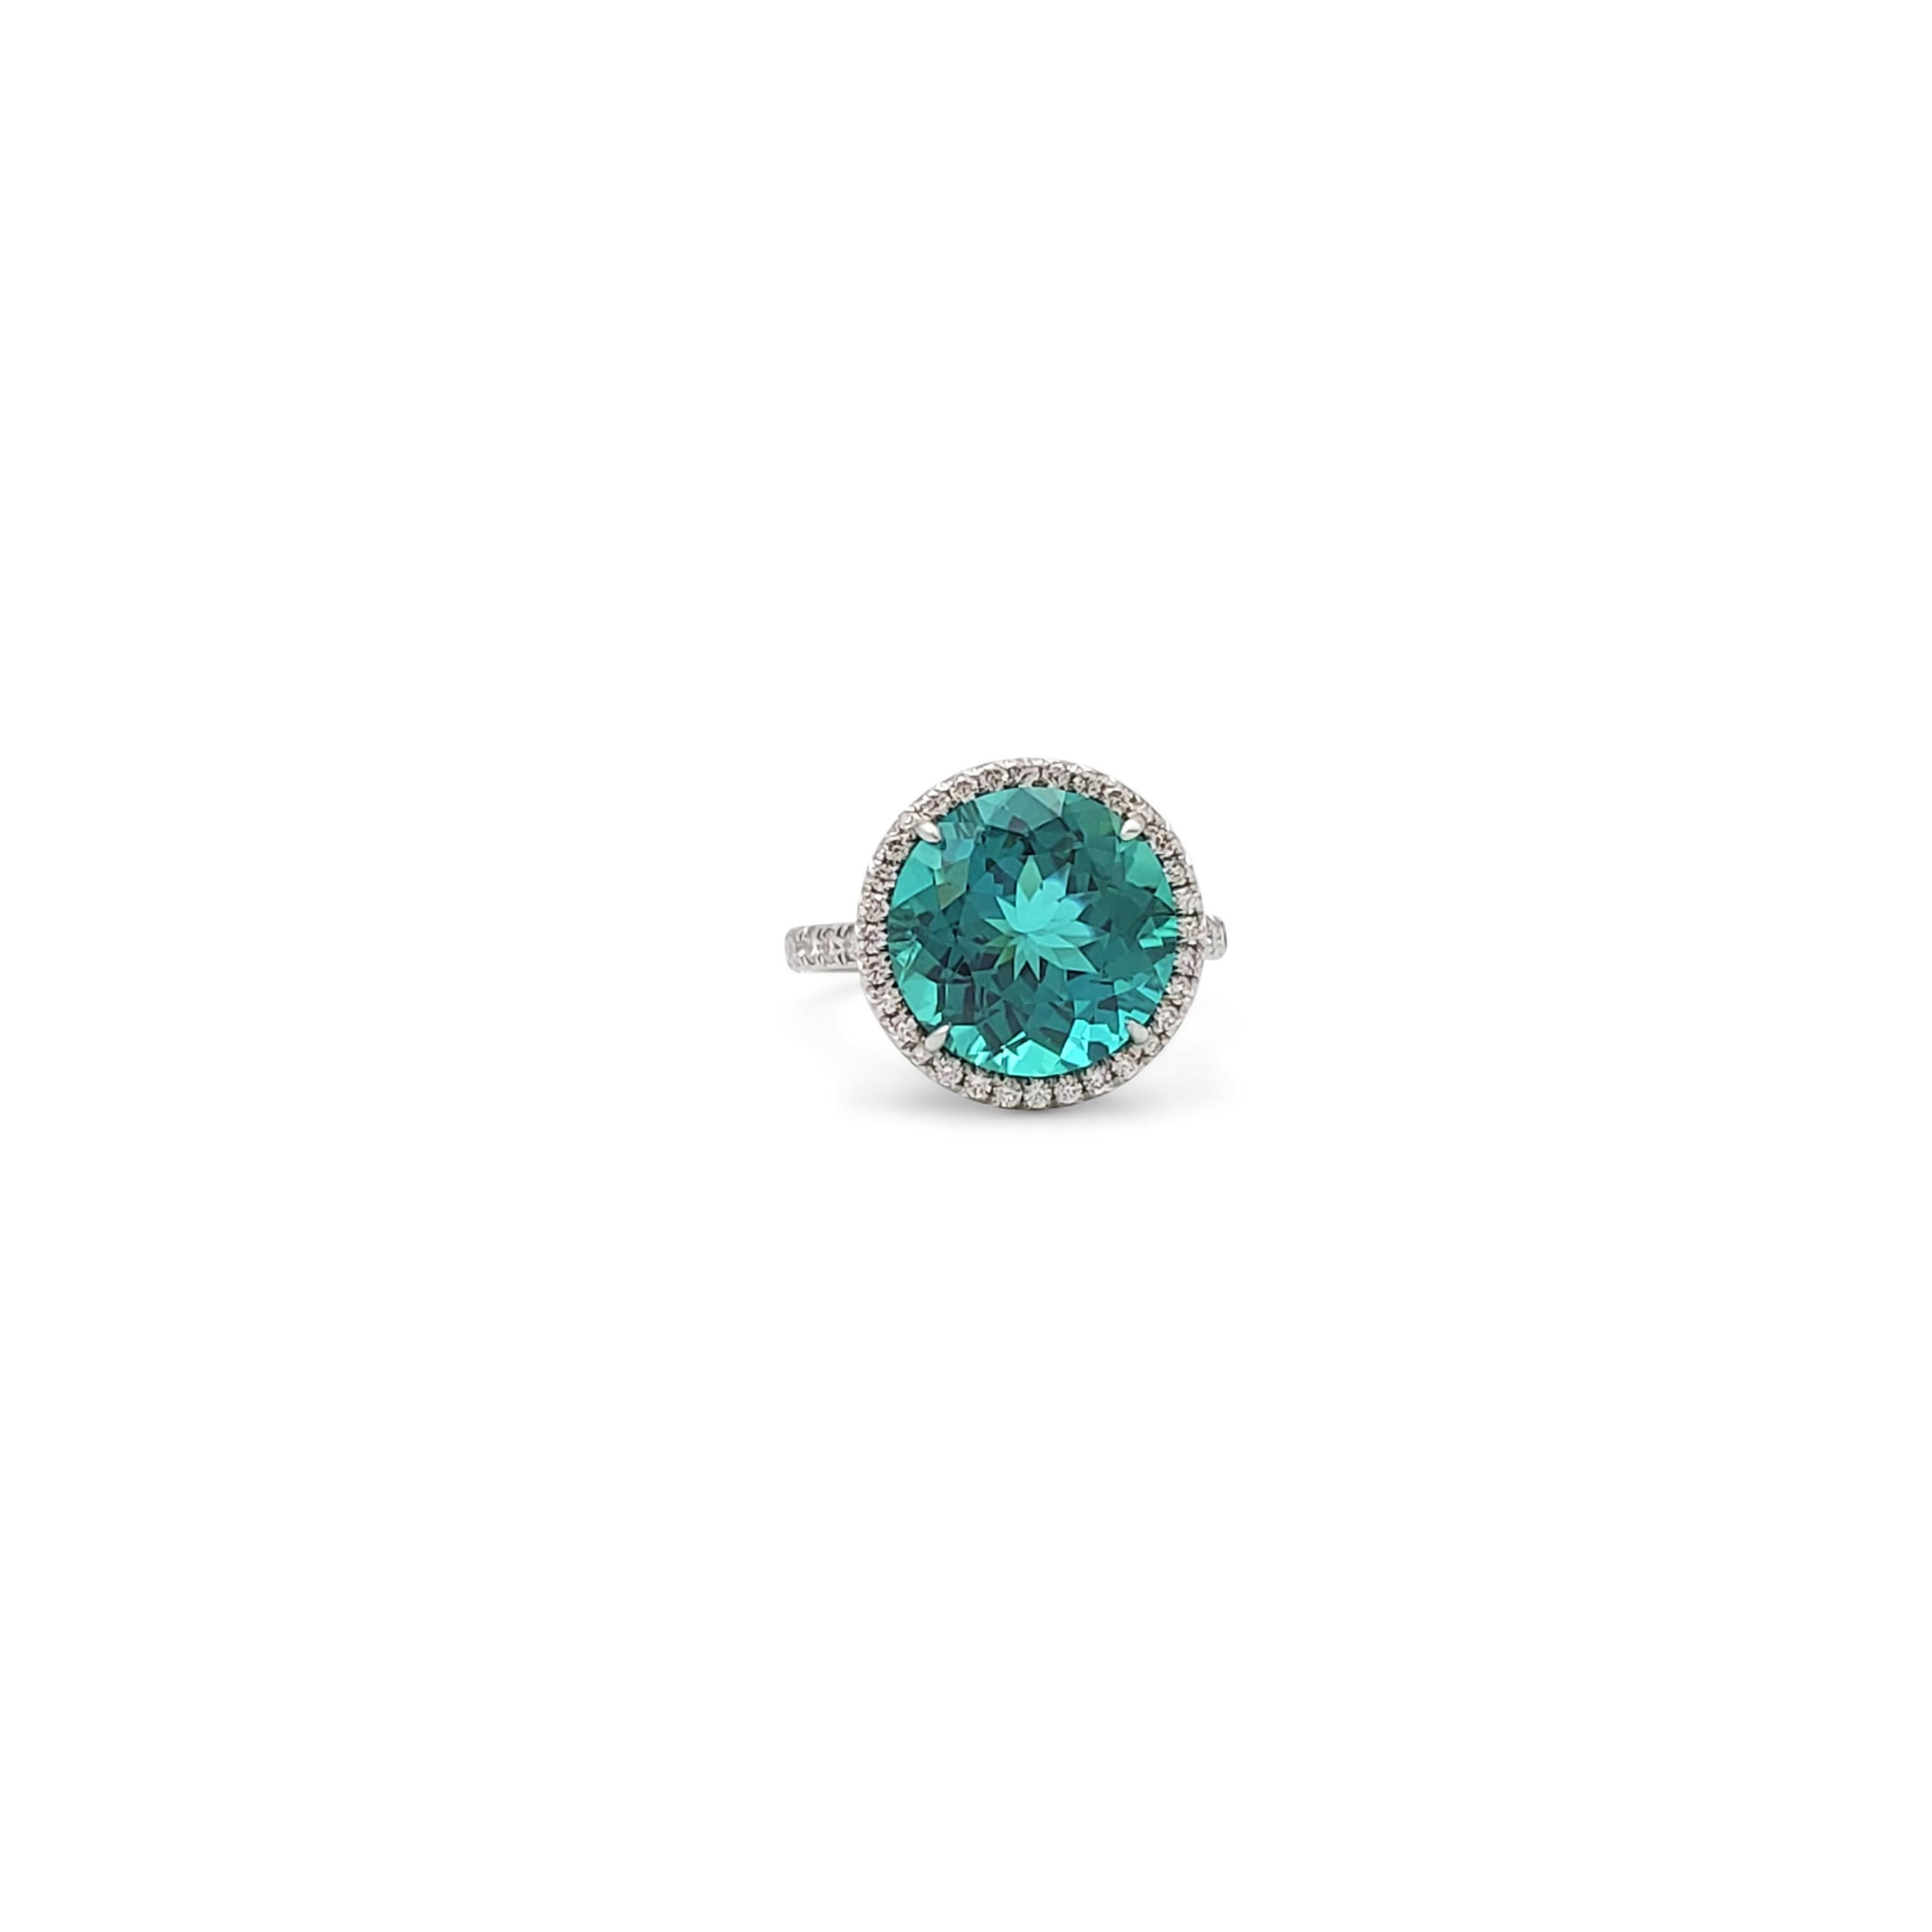 Authentic Tiffany & Co. 'Soleste' ring centers on a round faceted bluish-green tourmaline stone weighing 6.29 carats. The lively neon bluish-green gemstone is mounted in a delicate platinum mounting that is pave set with an estimated 0.75 carats